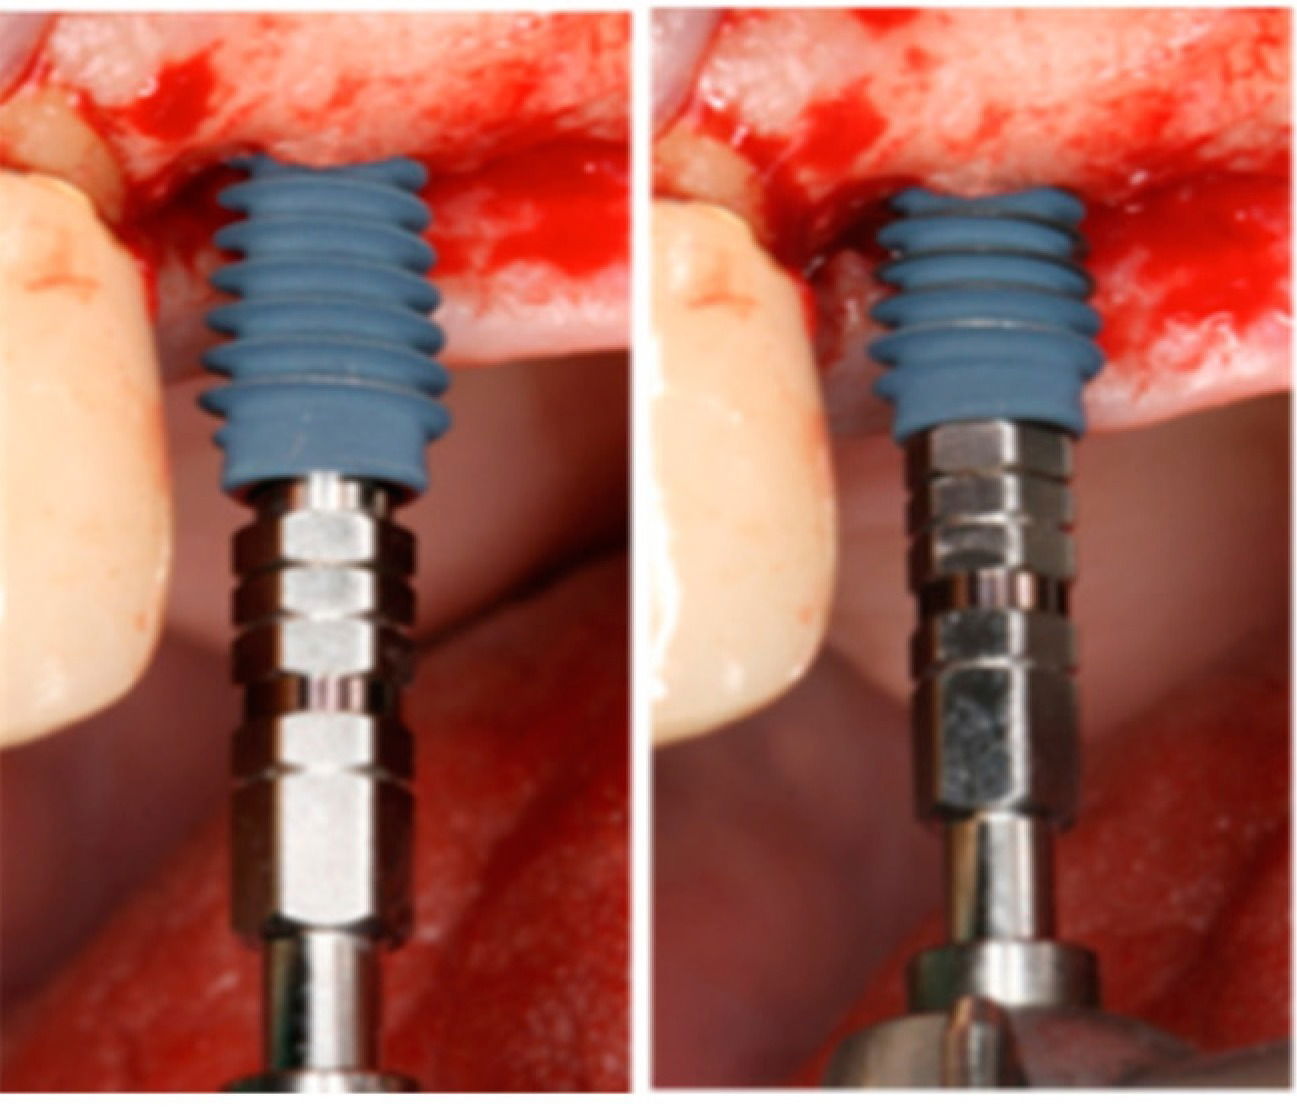 Innovative Dental Implant Design for Immediate Loading and Greater Initial Stability